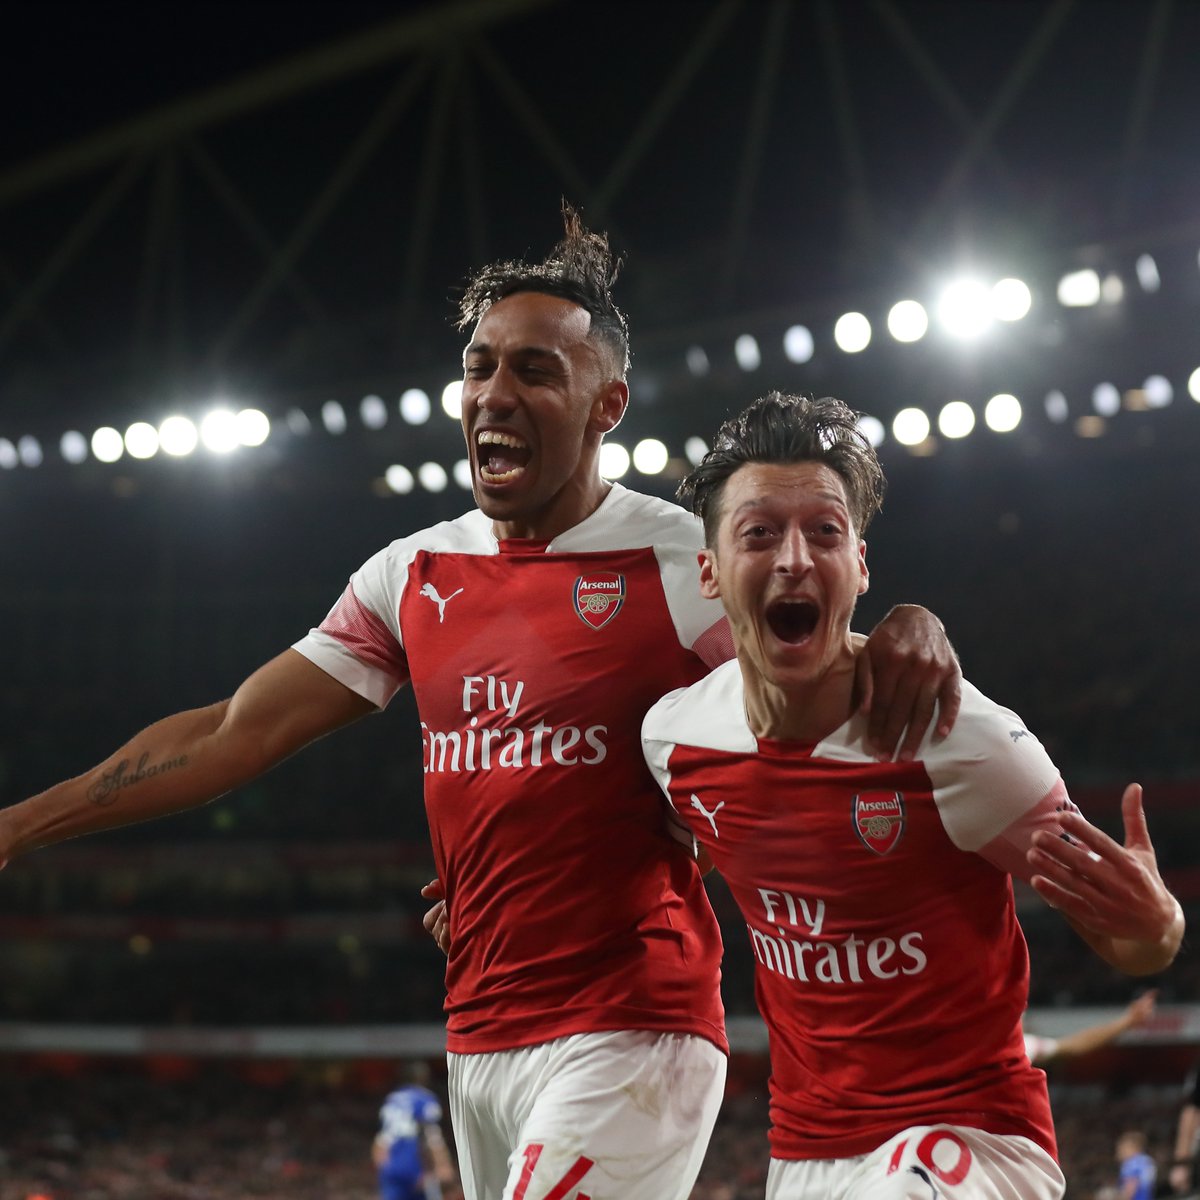 In October against Leicester he captained the side for the first time and produced an absolute masterclass, one of the best attacking midfielder performances the PL has ever seen. Özil helped his team record a 10th successive win, scoring a goal and assisting one in a 3-1 win.